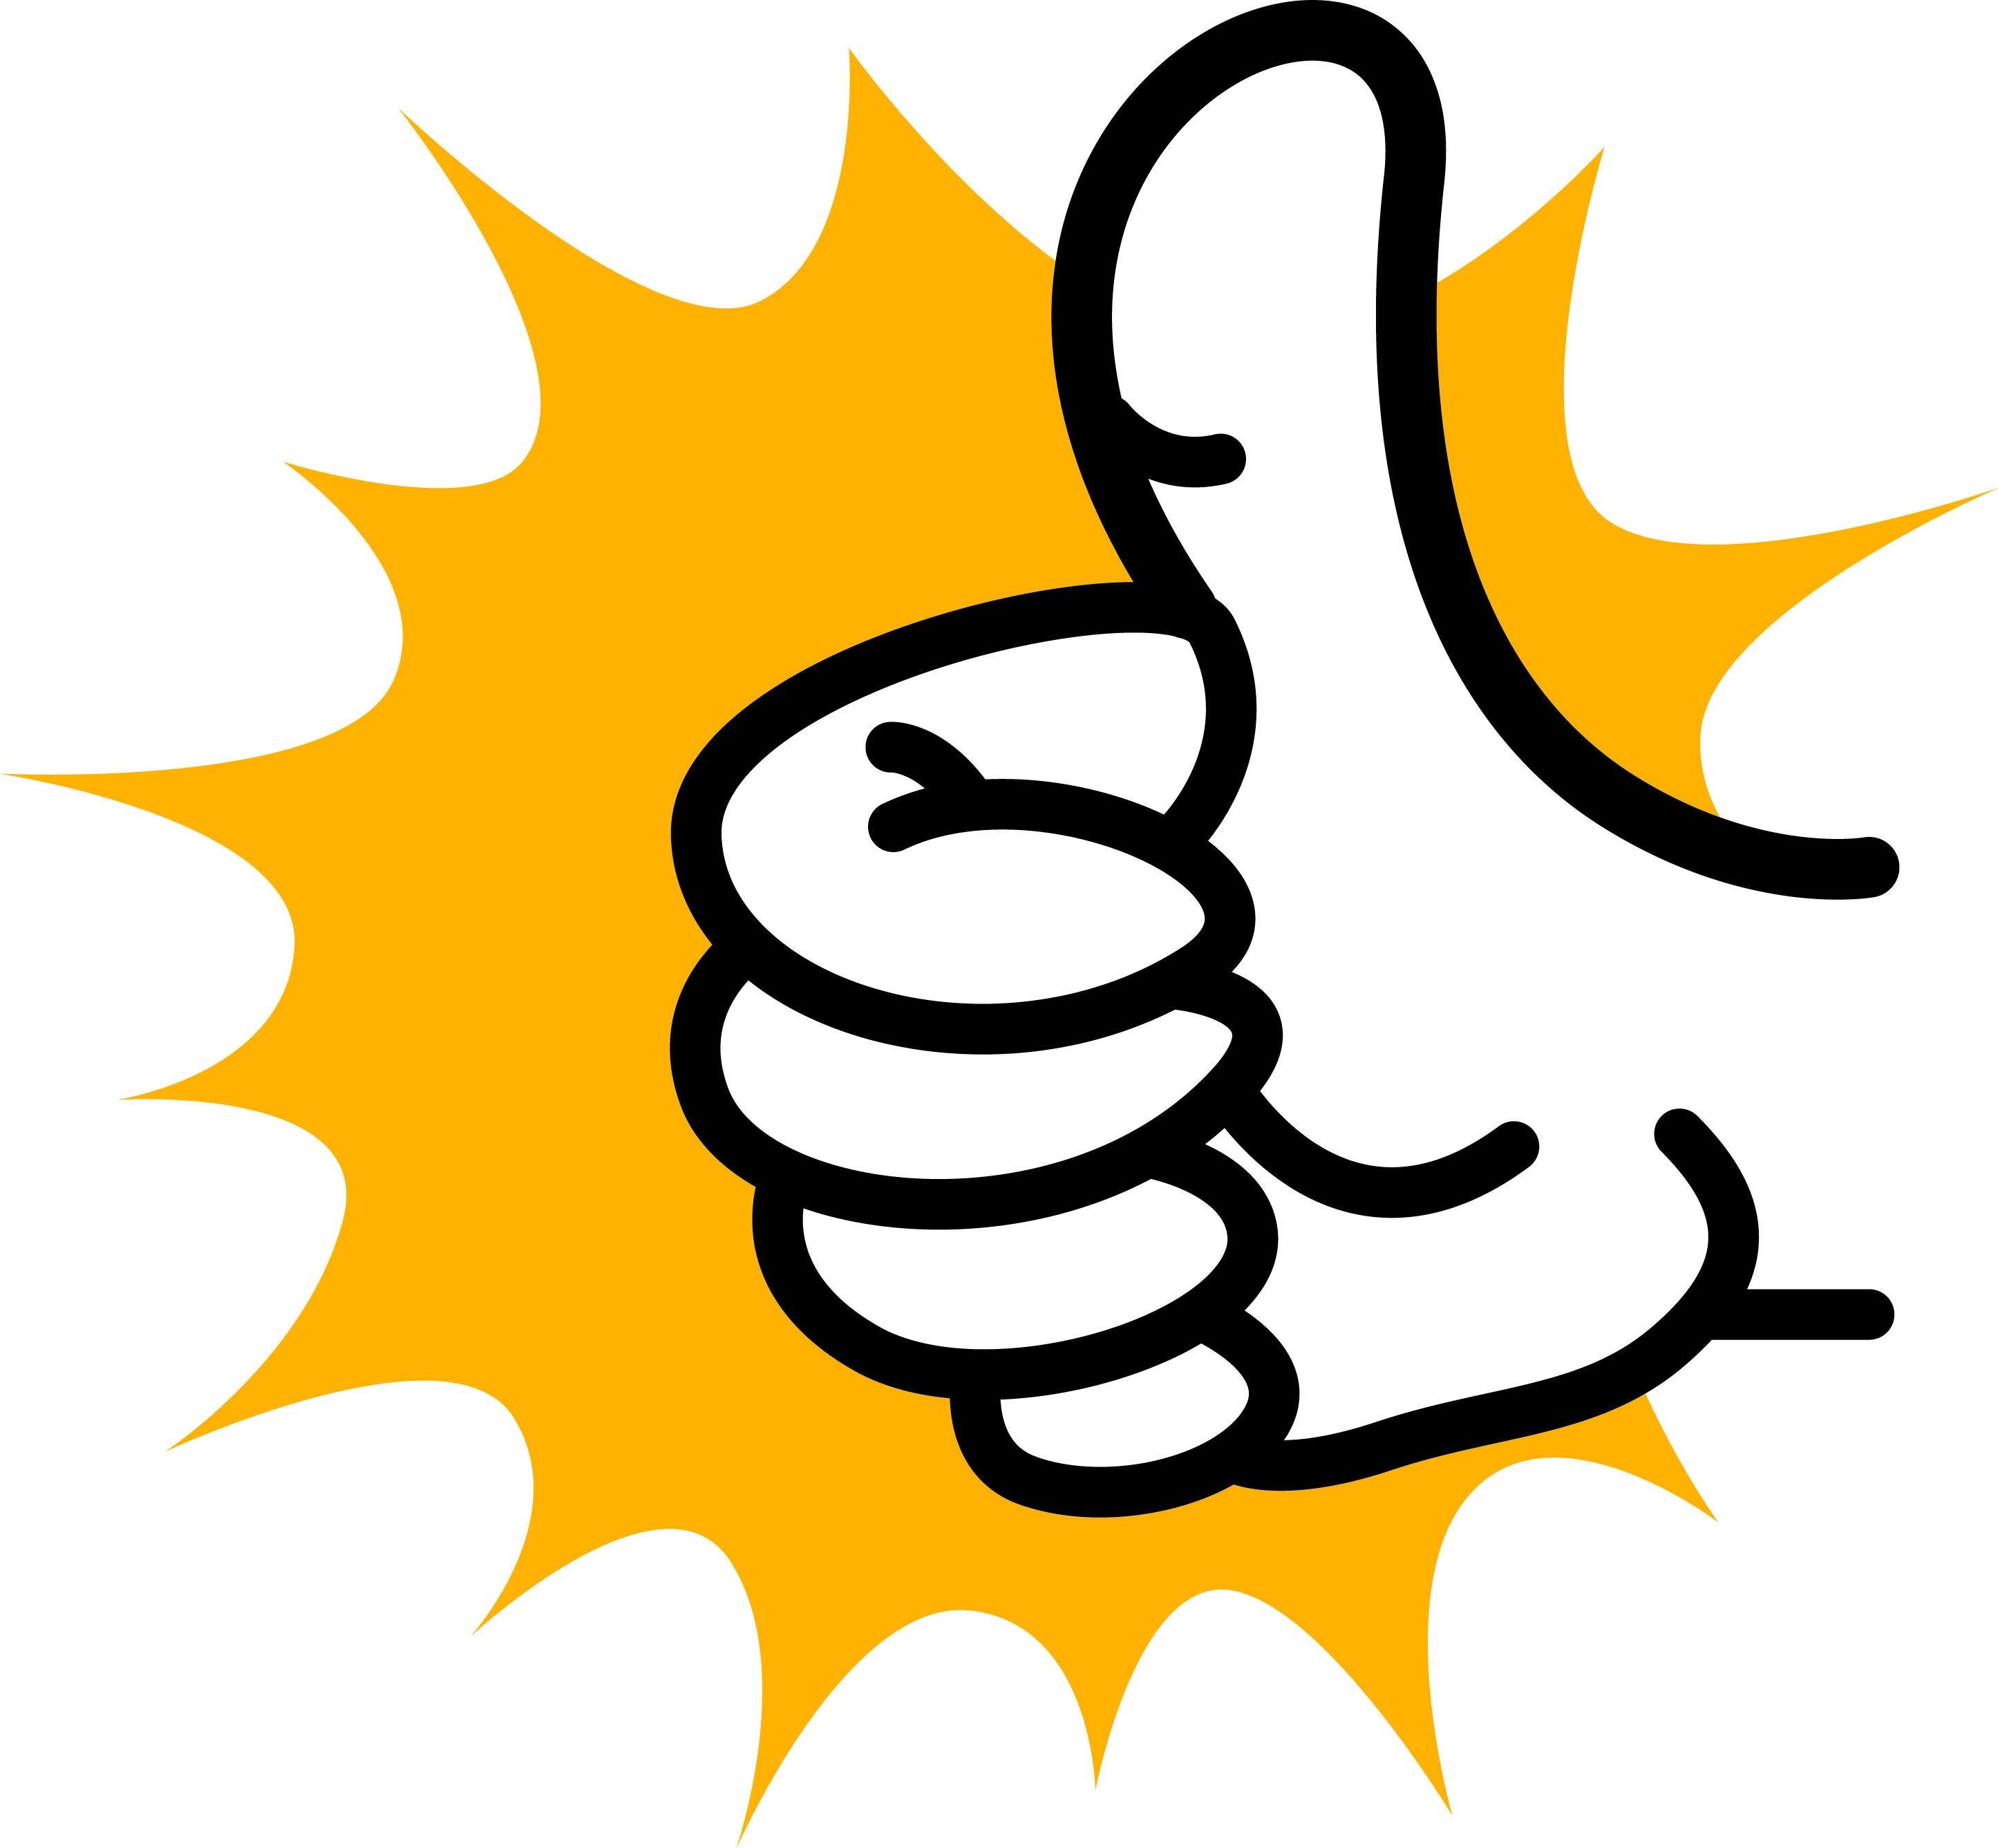 Free Thumbs Up Clipart, Download Free Thumbs Up Clipart png images